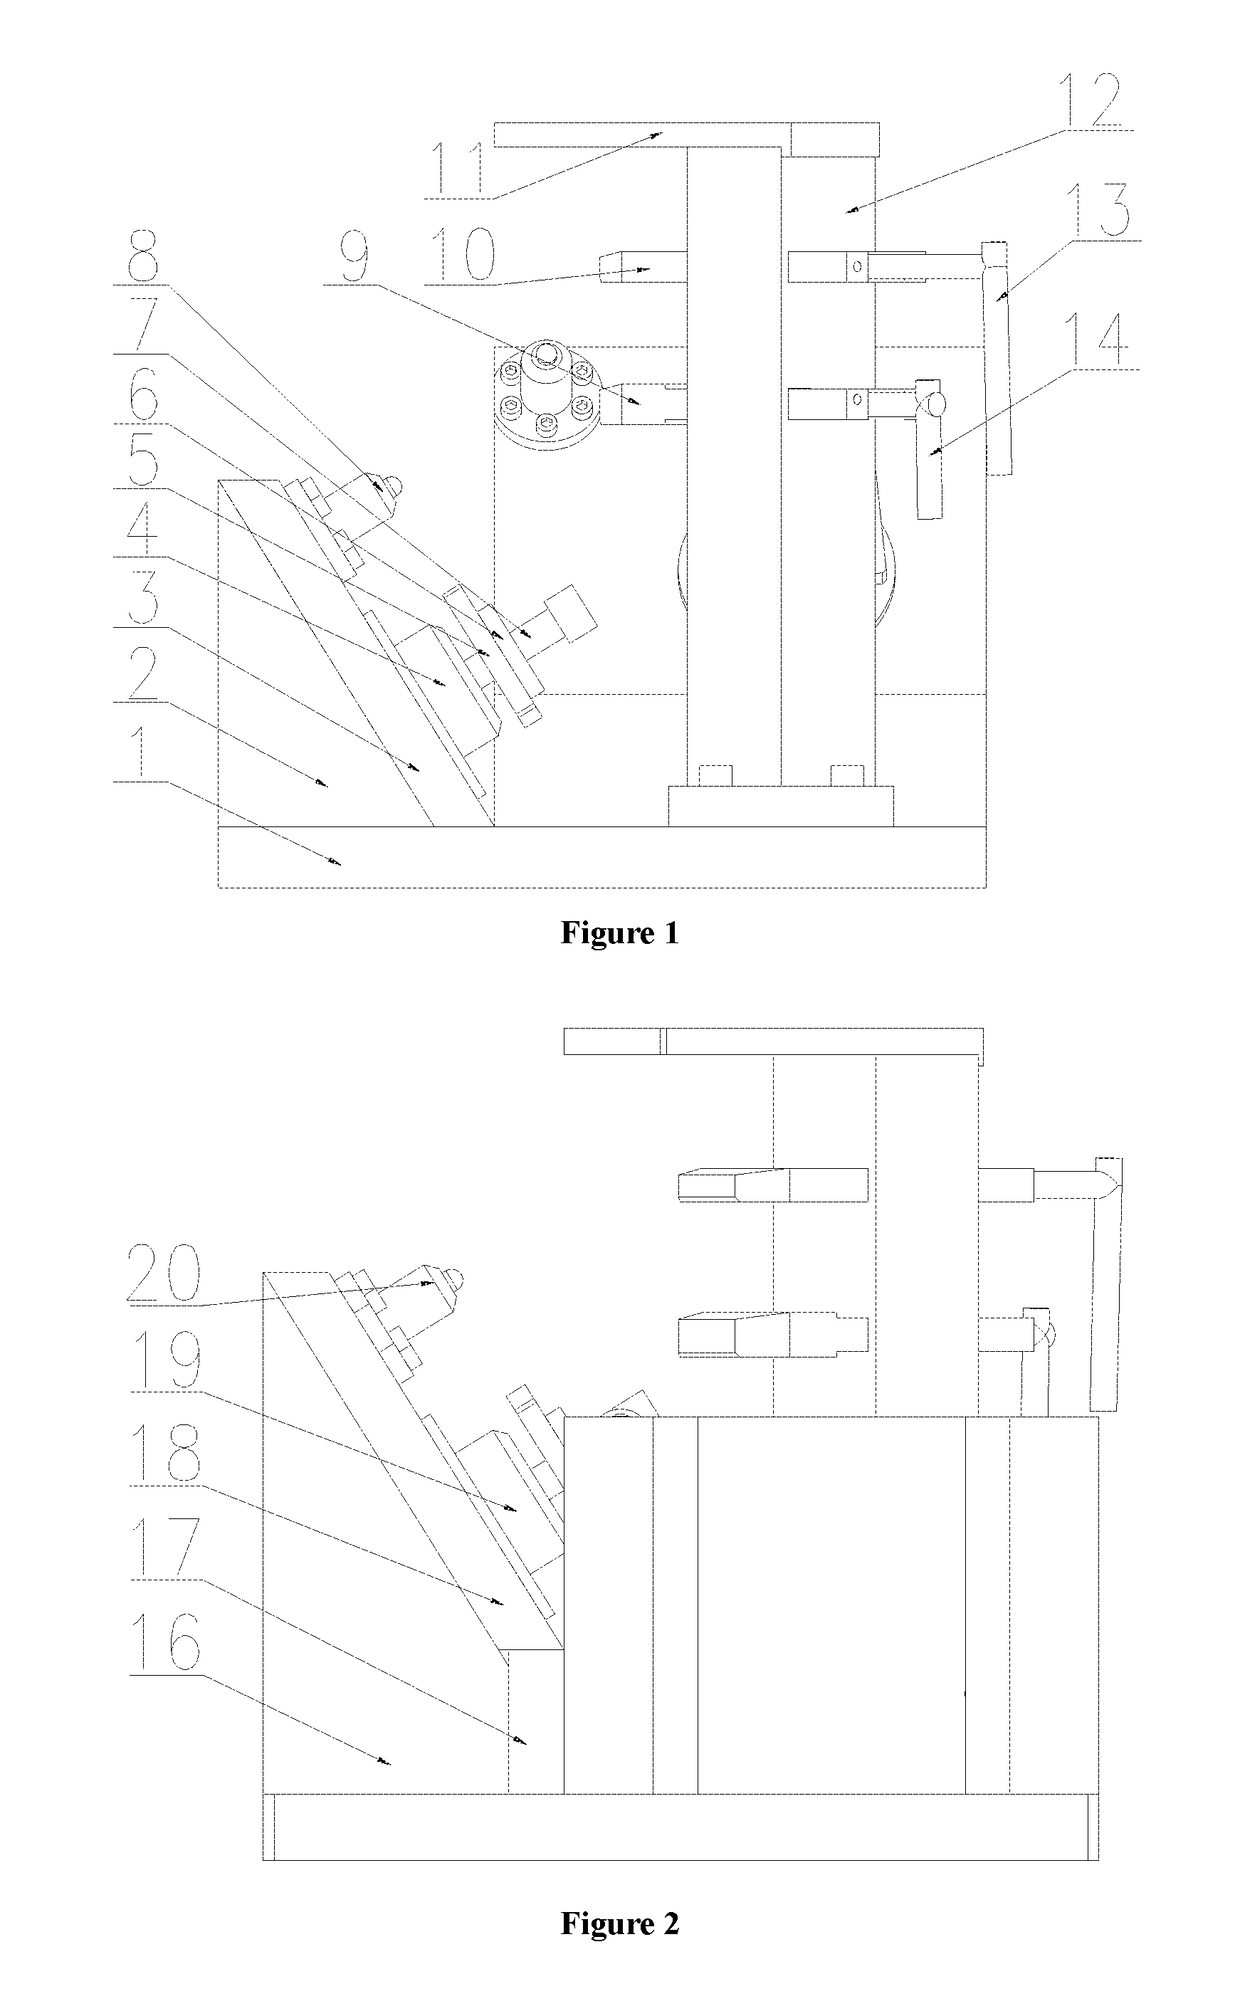 Method for drilling a steering knuckle casting